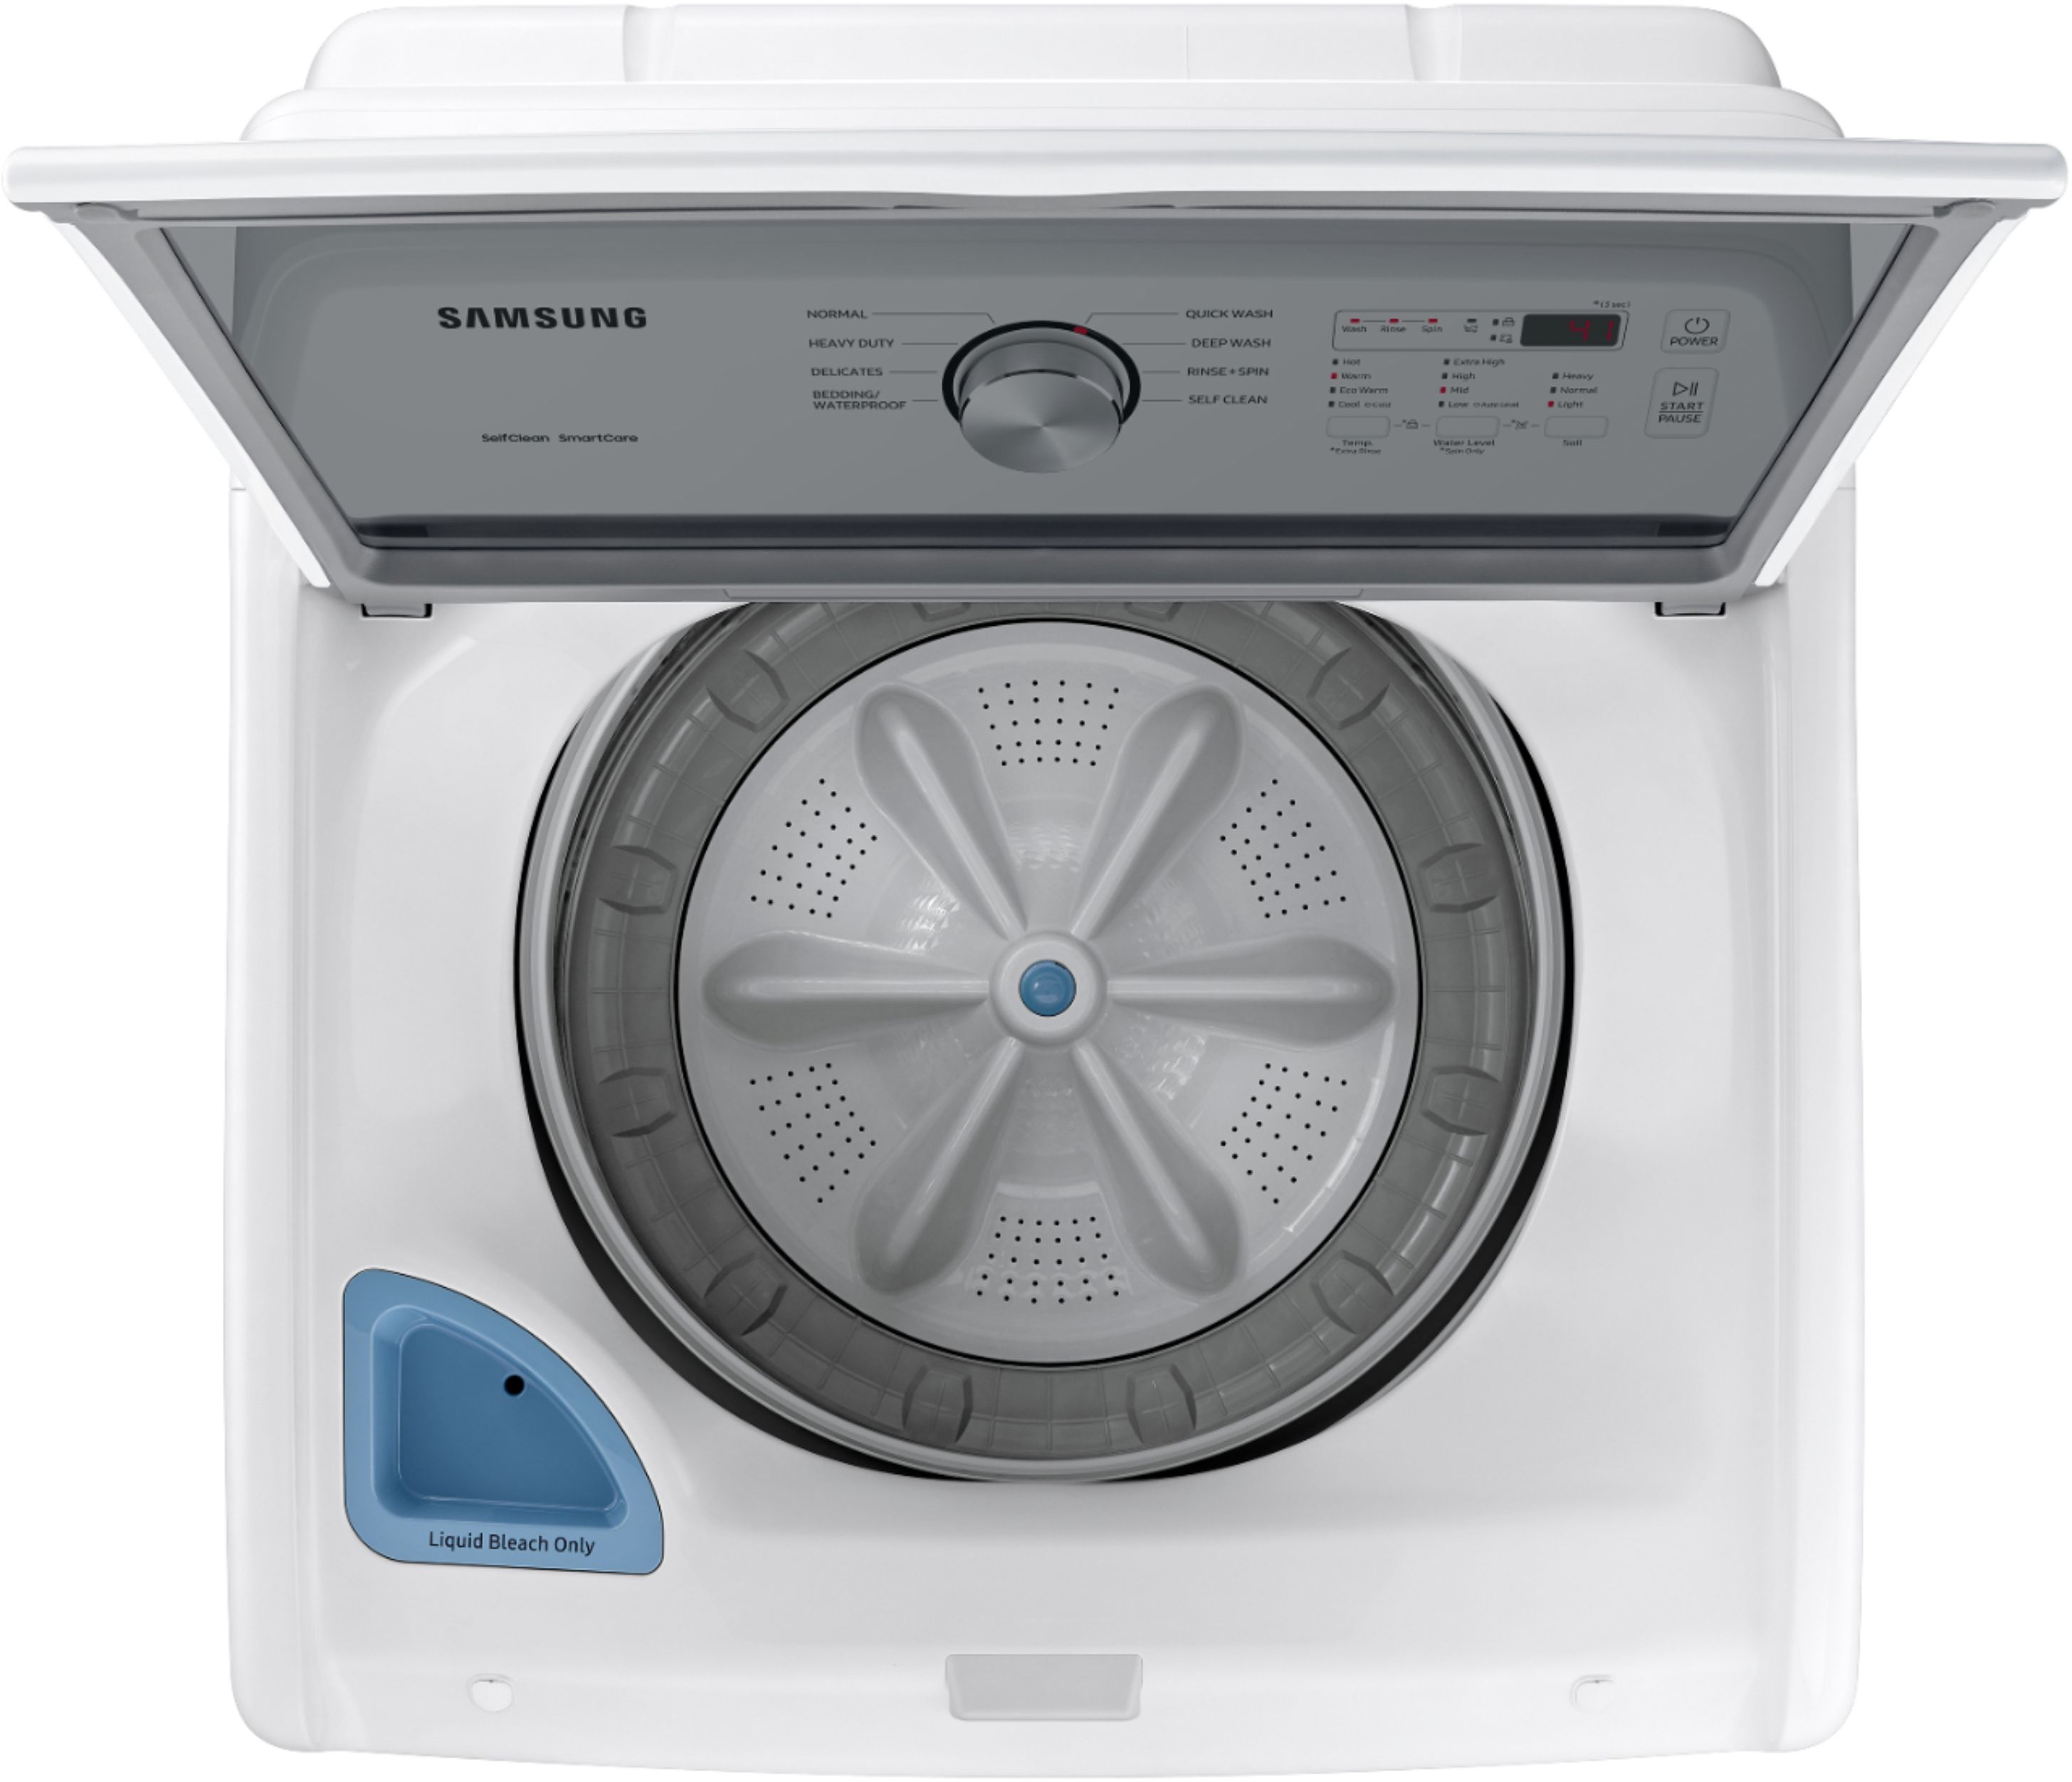 Samsung 4 5 Cu Ft High Efficiency Top Load Washer With Vibration 